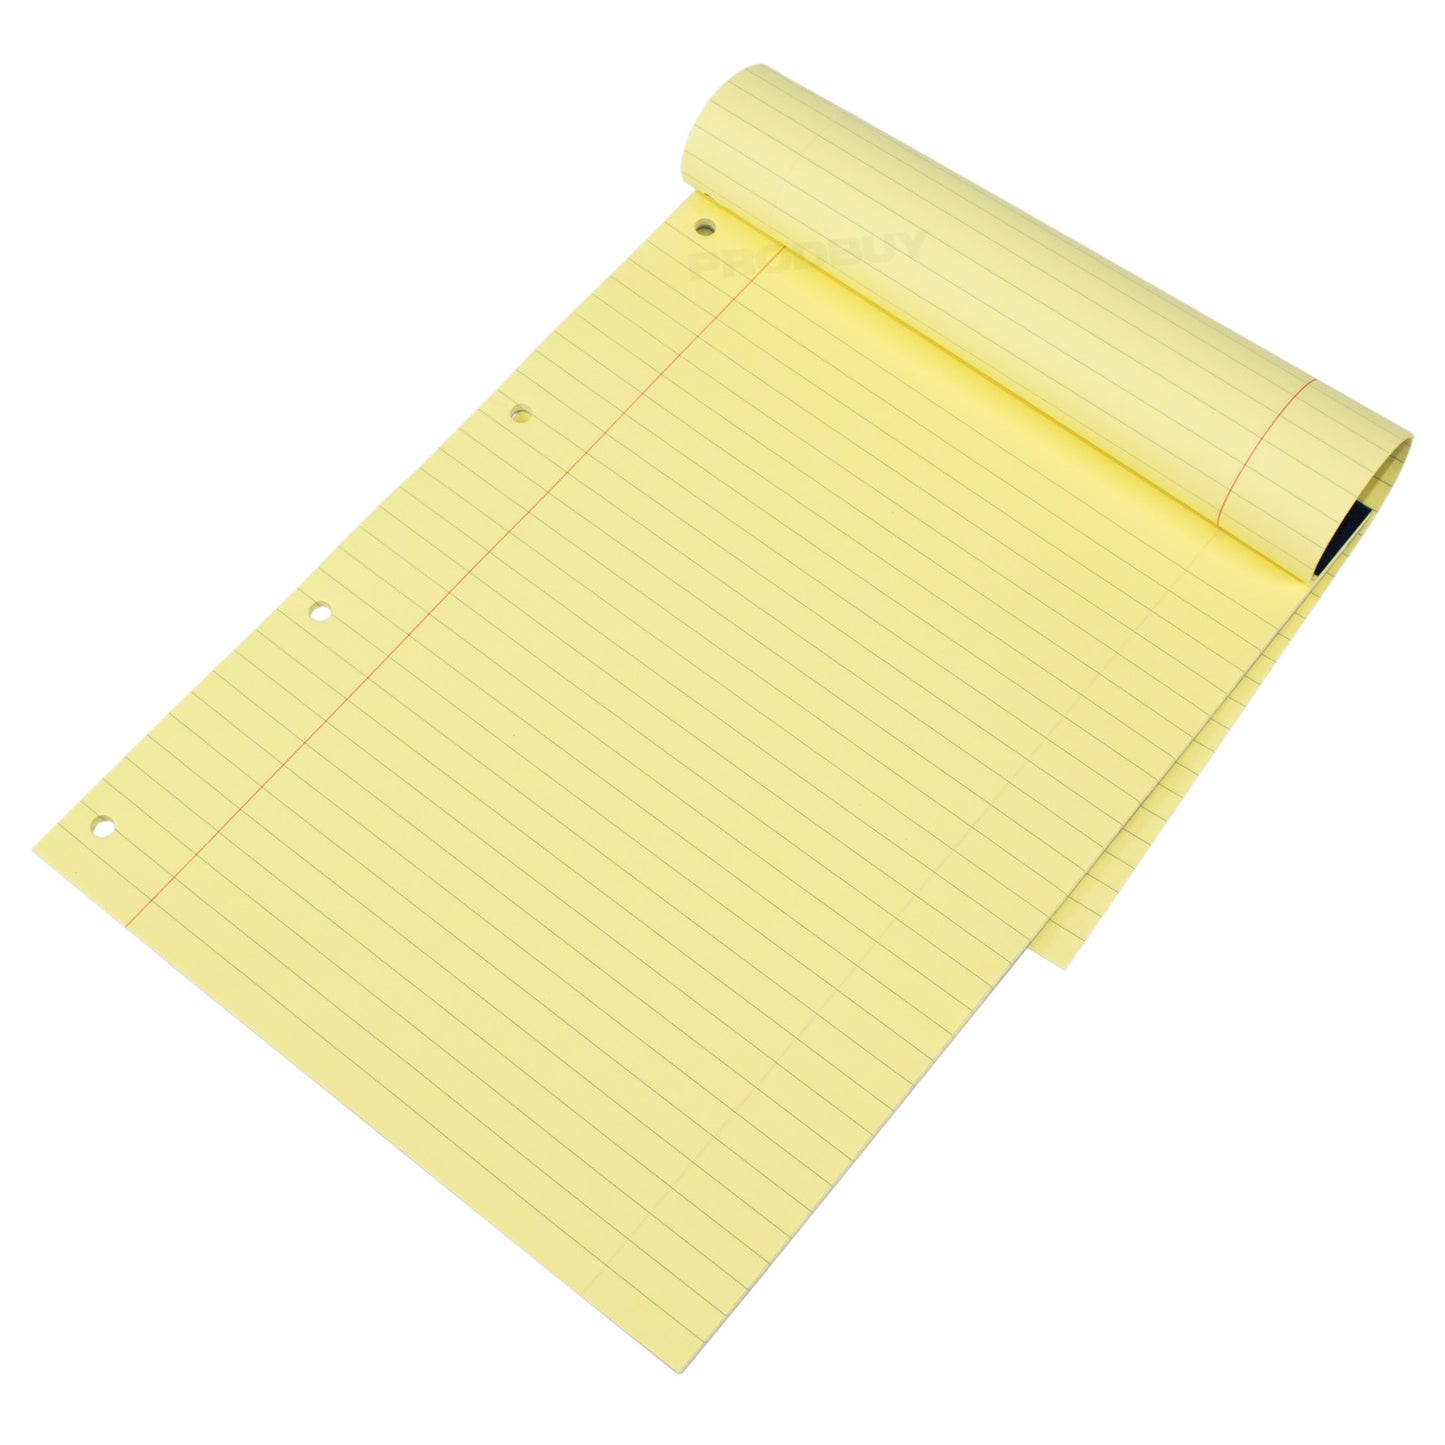 Set of 5 Yellow Legal Pads Lined A4 Memory Paper Notepads